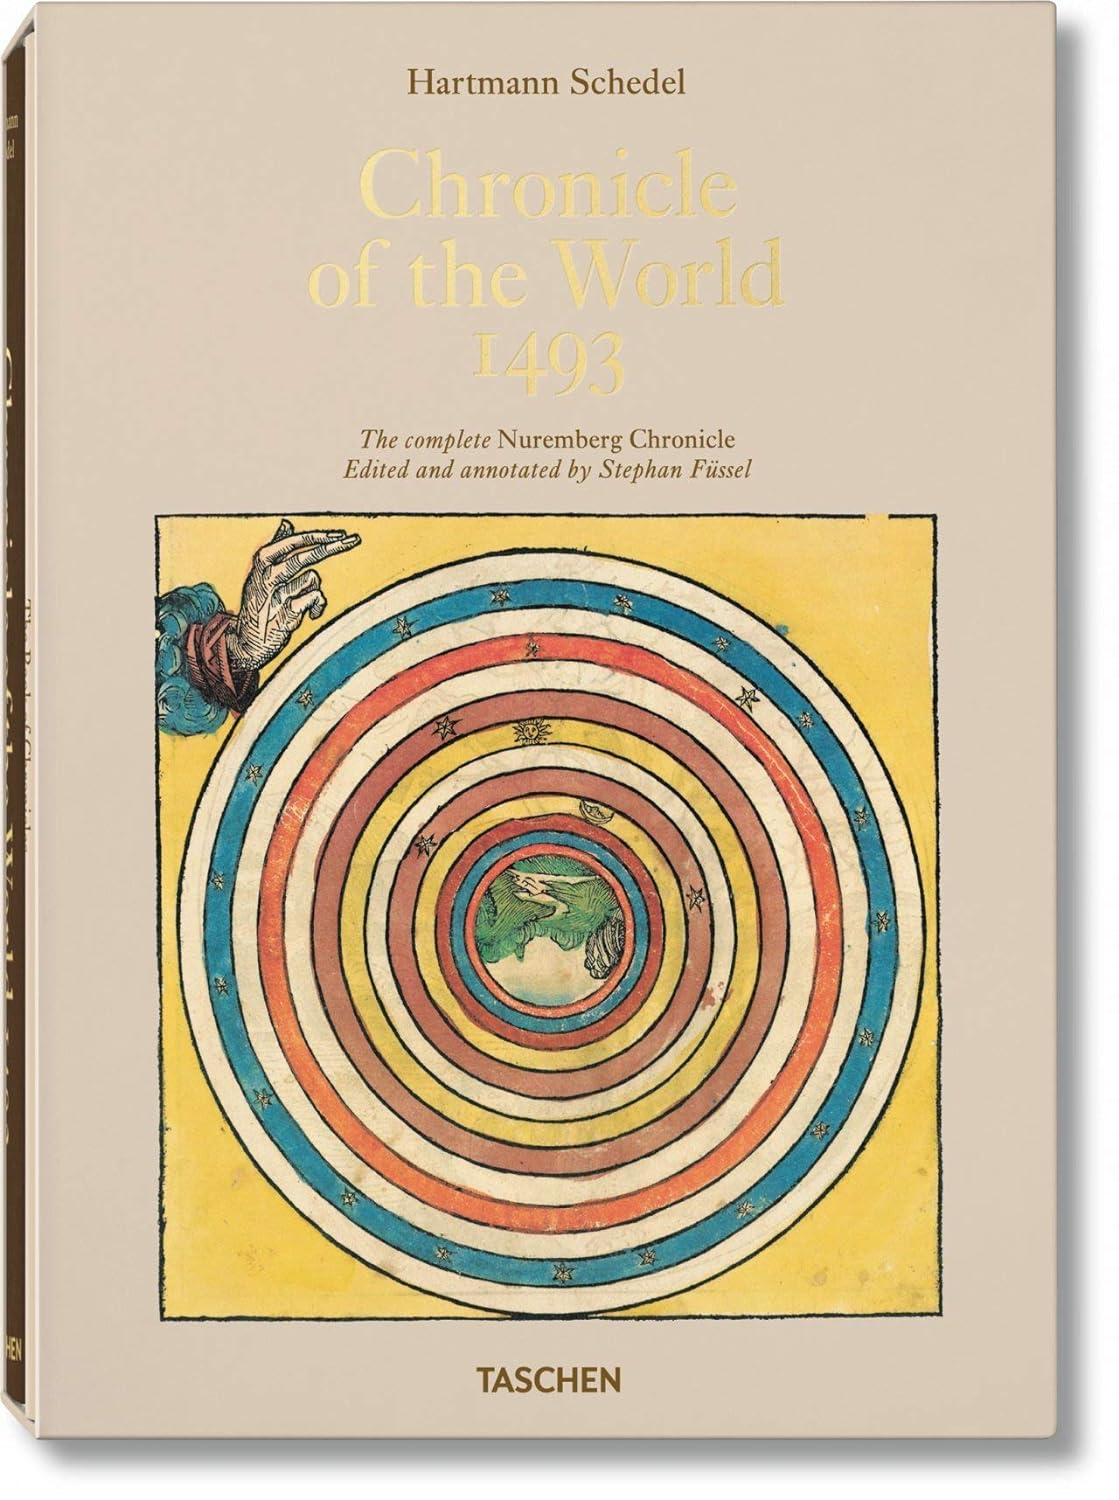 Schedel: Chronicle of the World - 1493